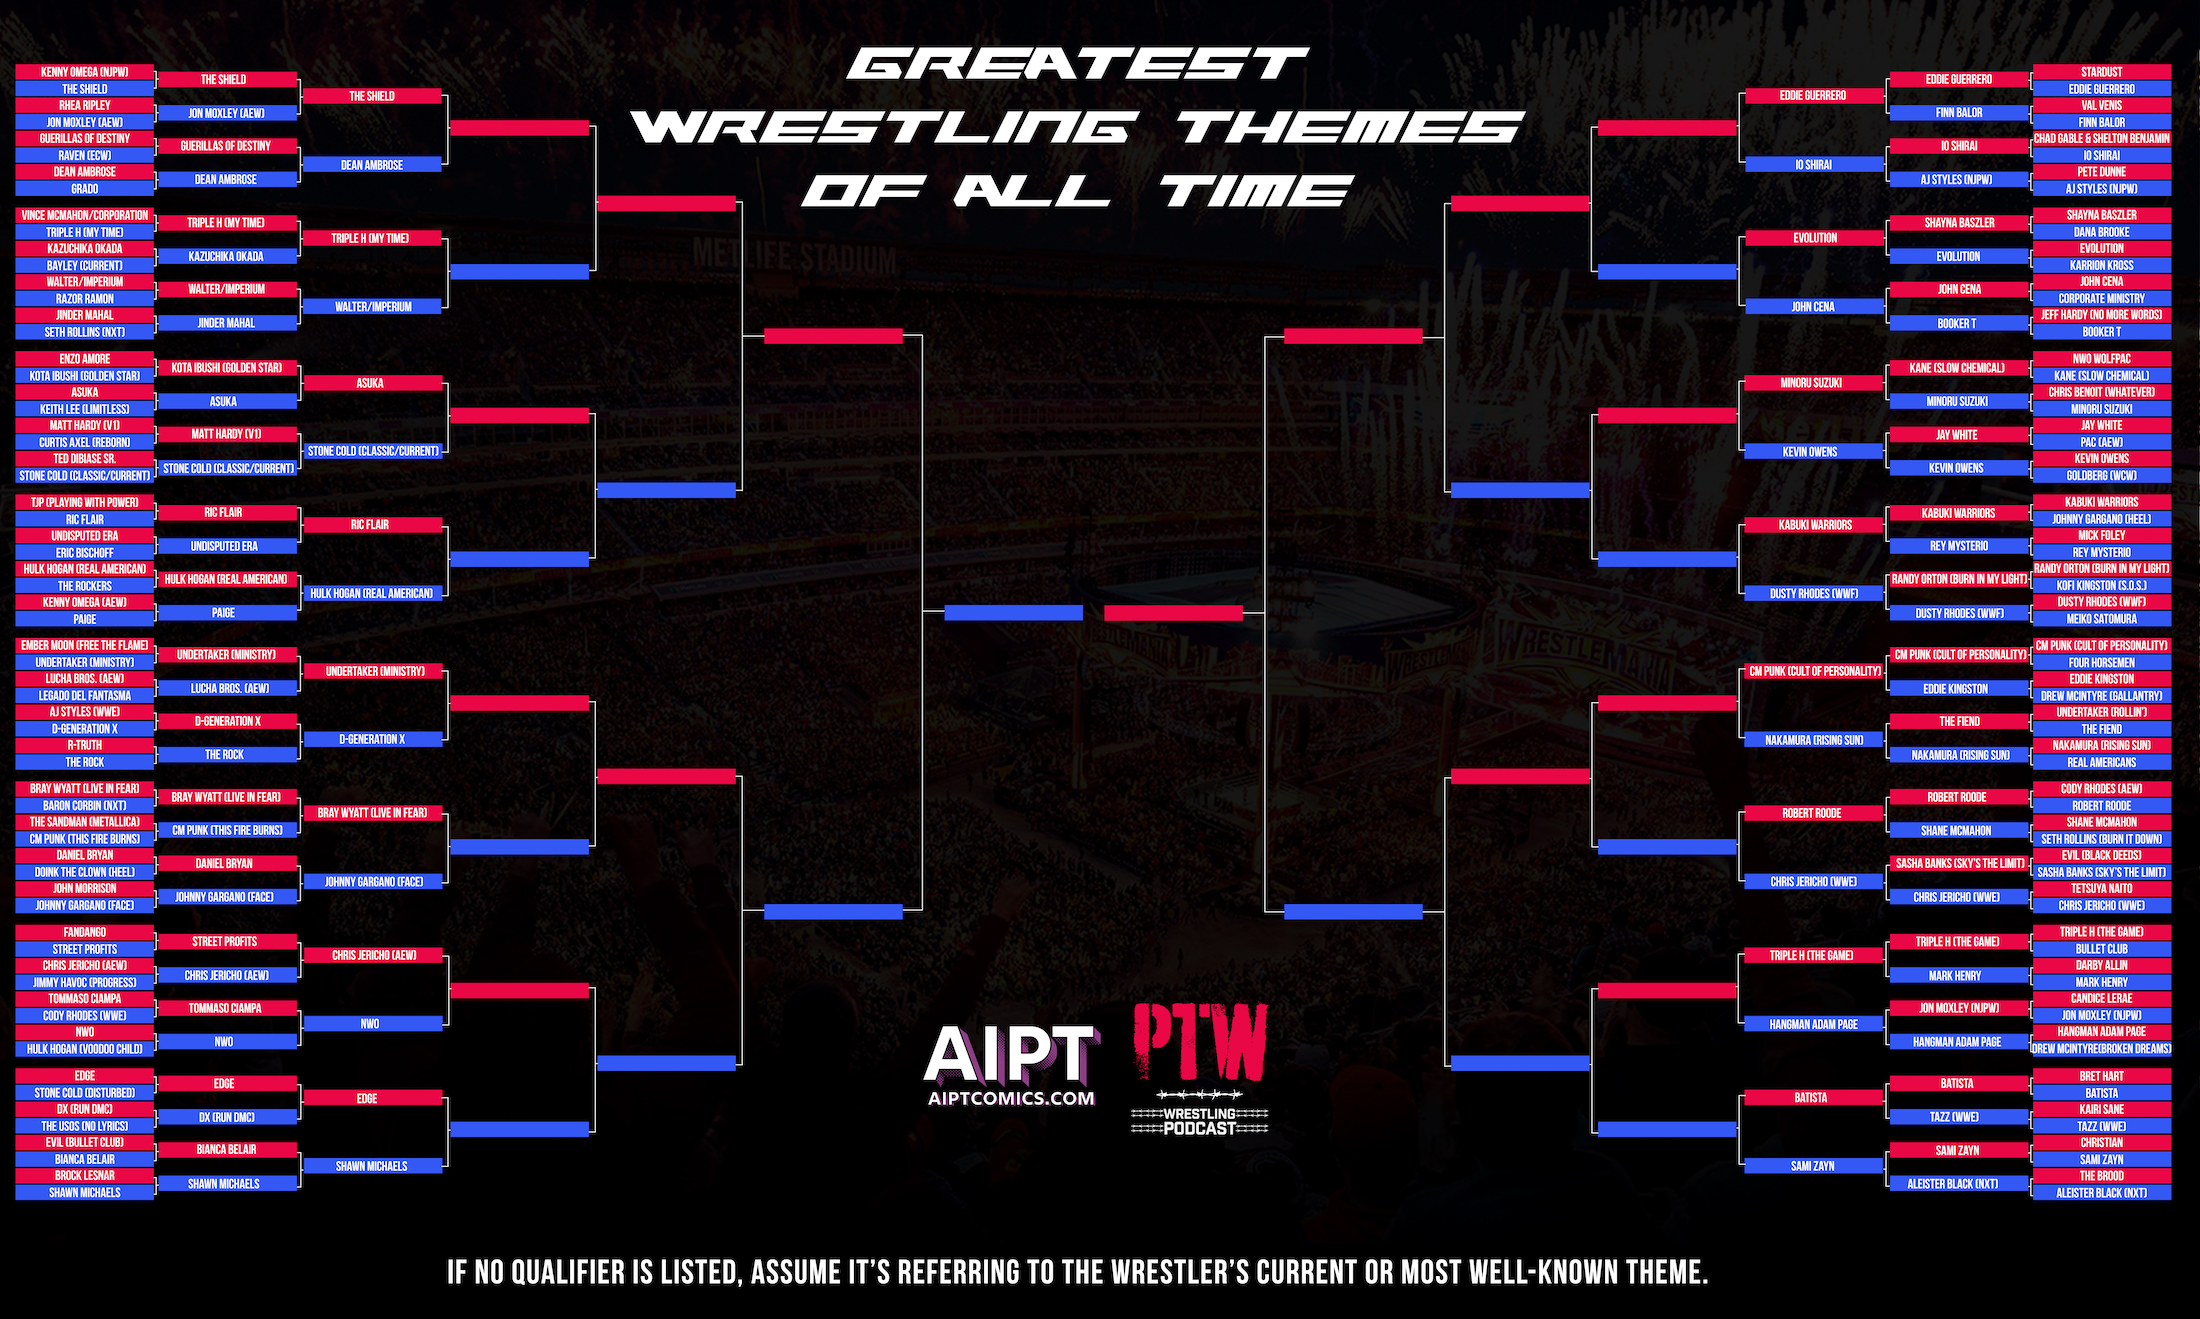 PTW Wrestling Podcast episode 135: The Greatest Wrestling Themes Ever: Part 2